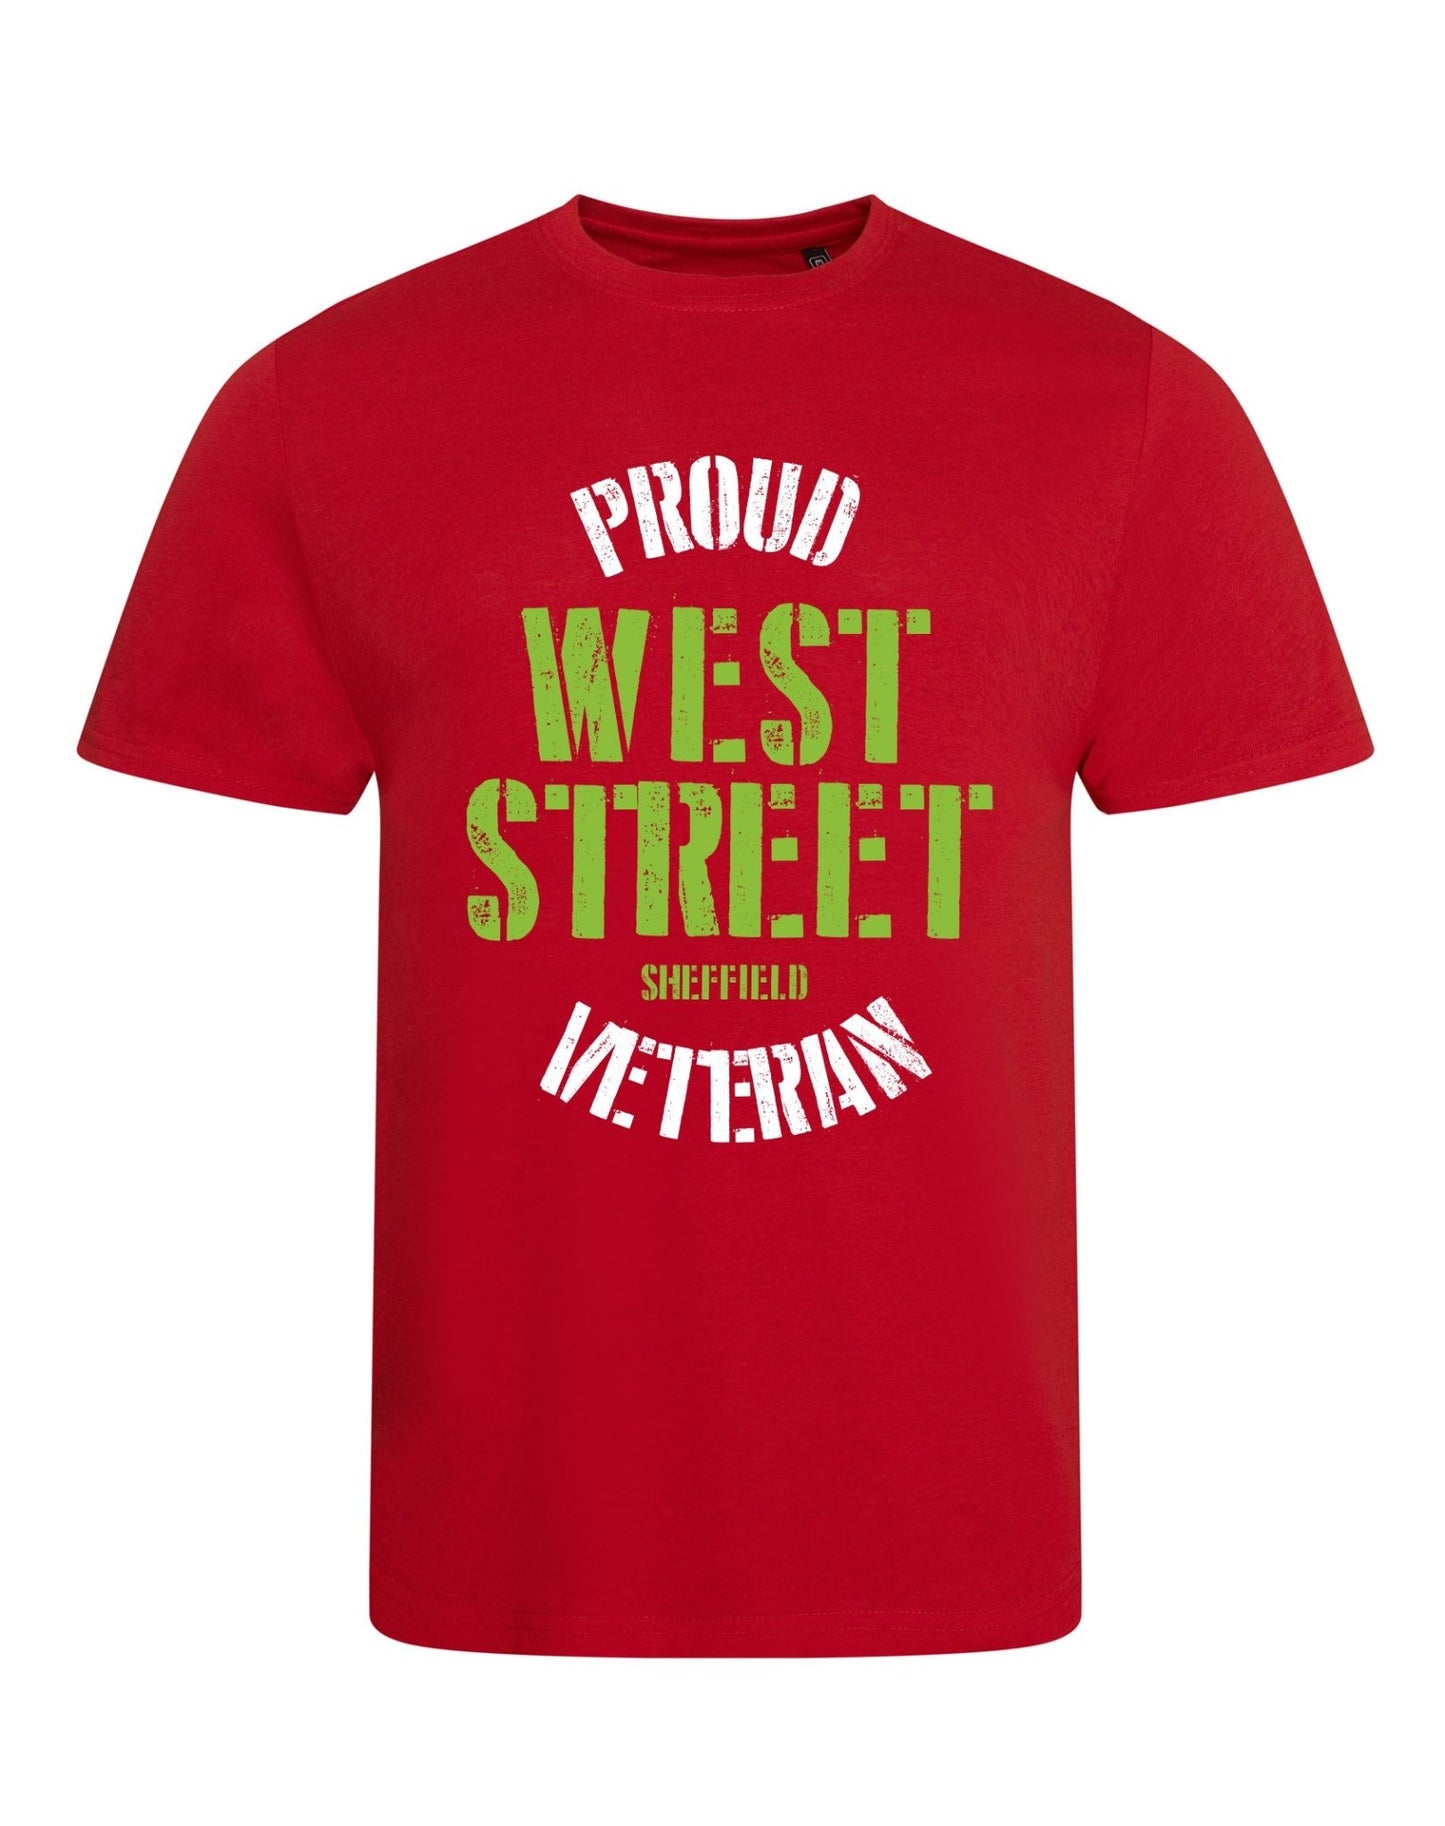 West Street Veteran unisex fit T-shirt - various colours - Dirty Stop Outs